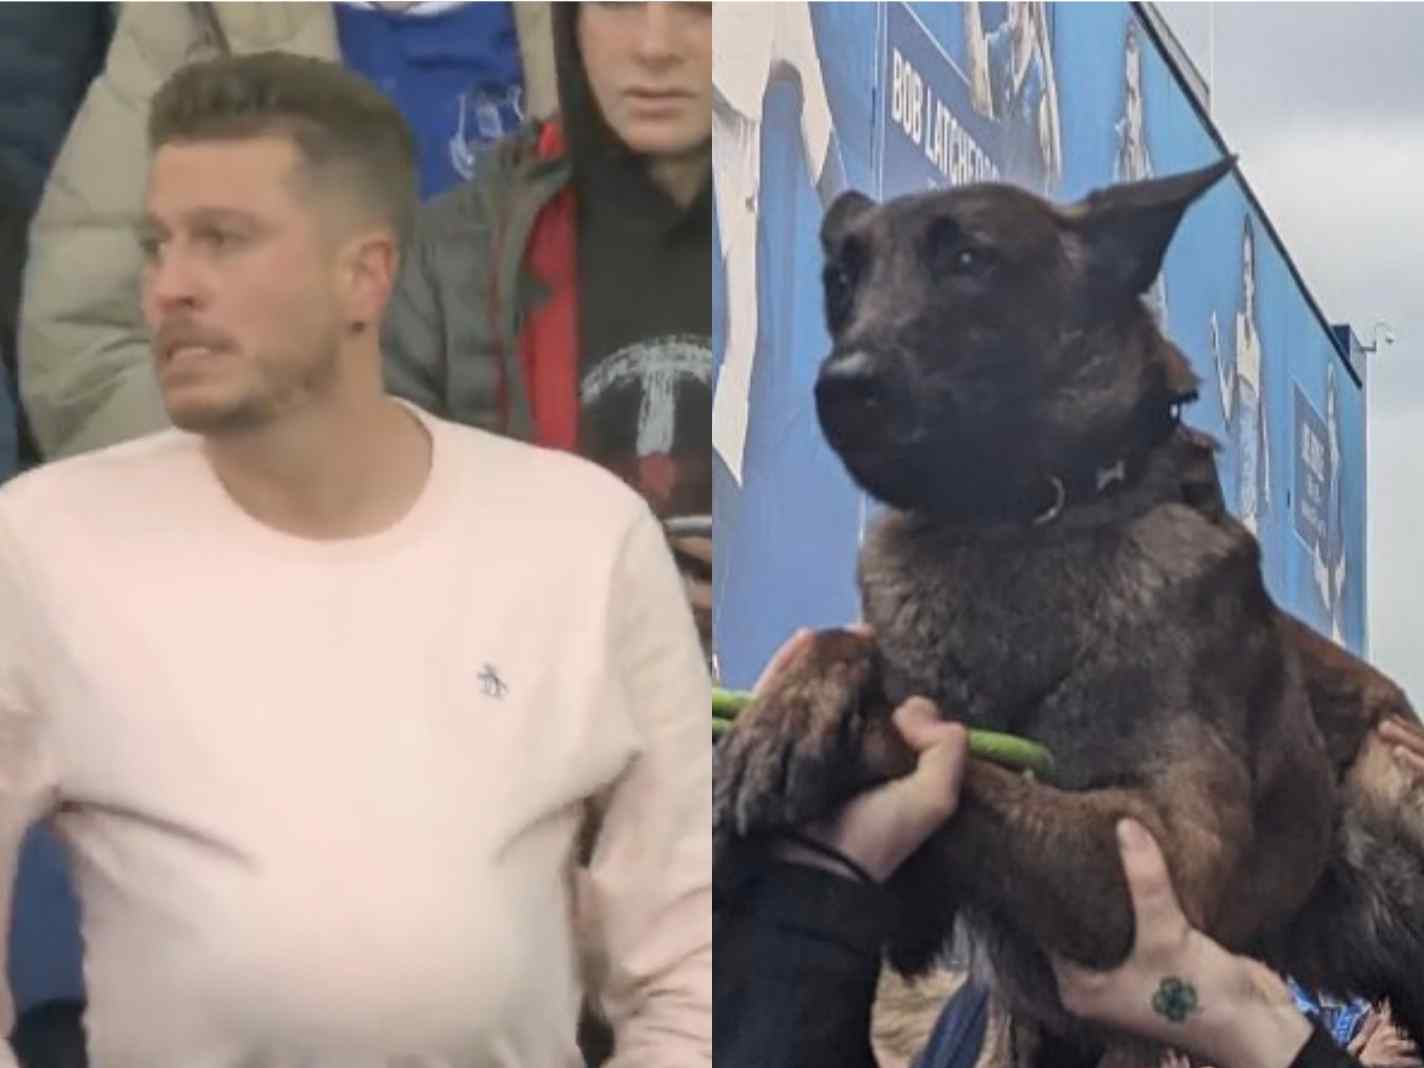 Dog crowd surfs outside while Everton fan hides the ball inside